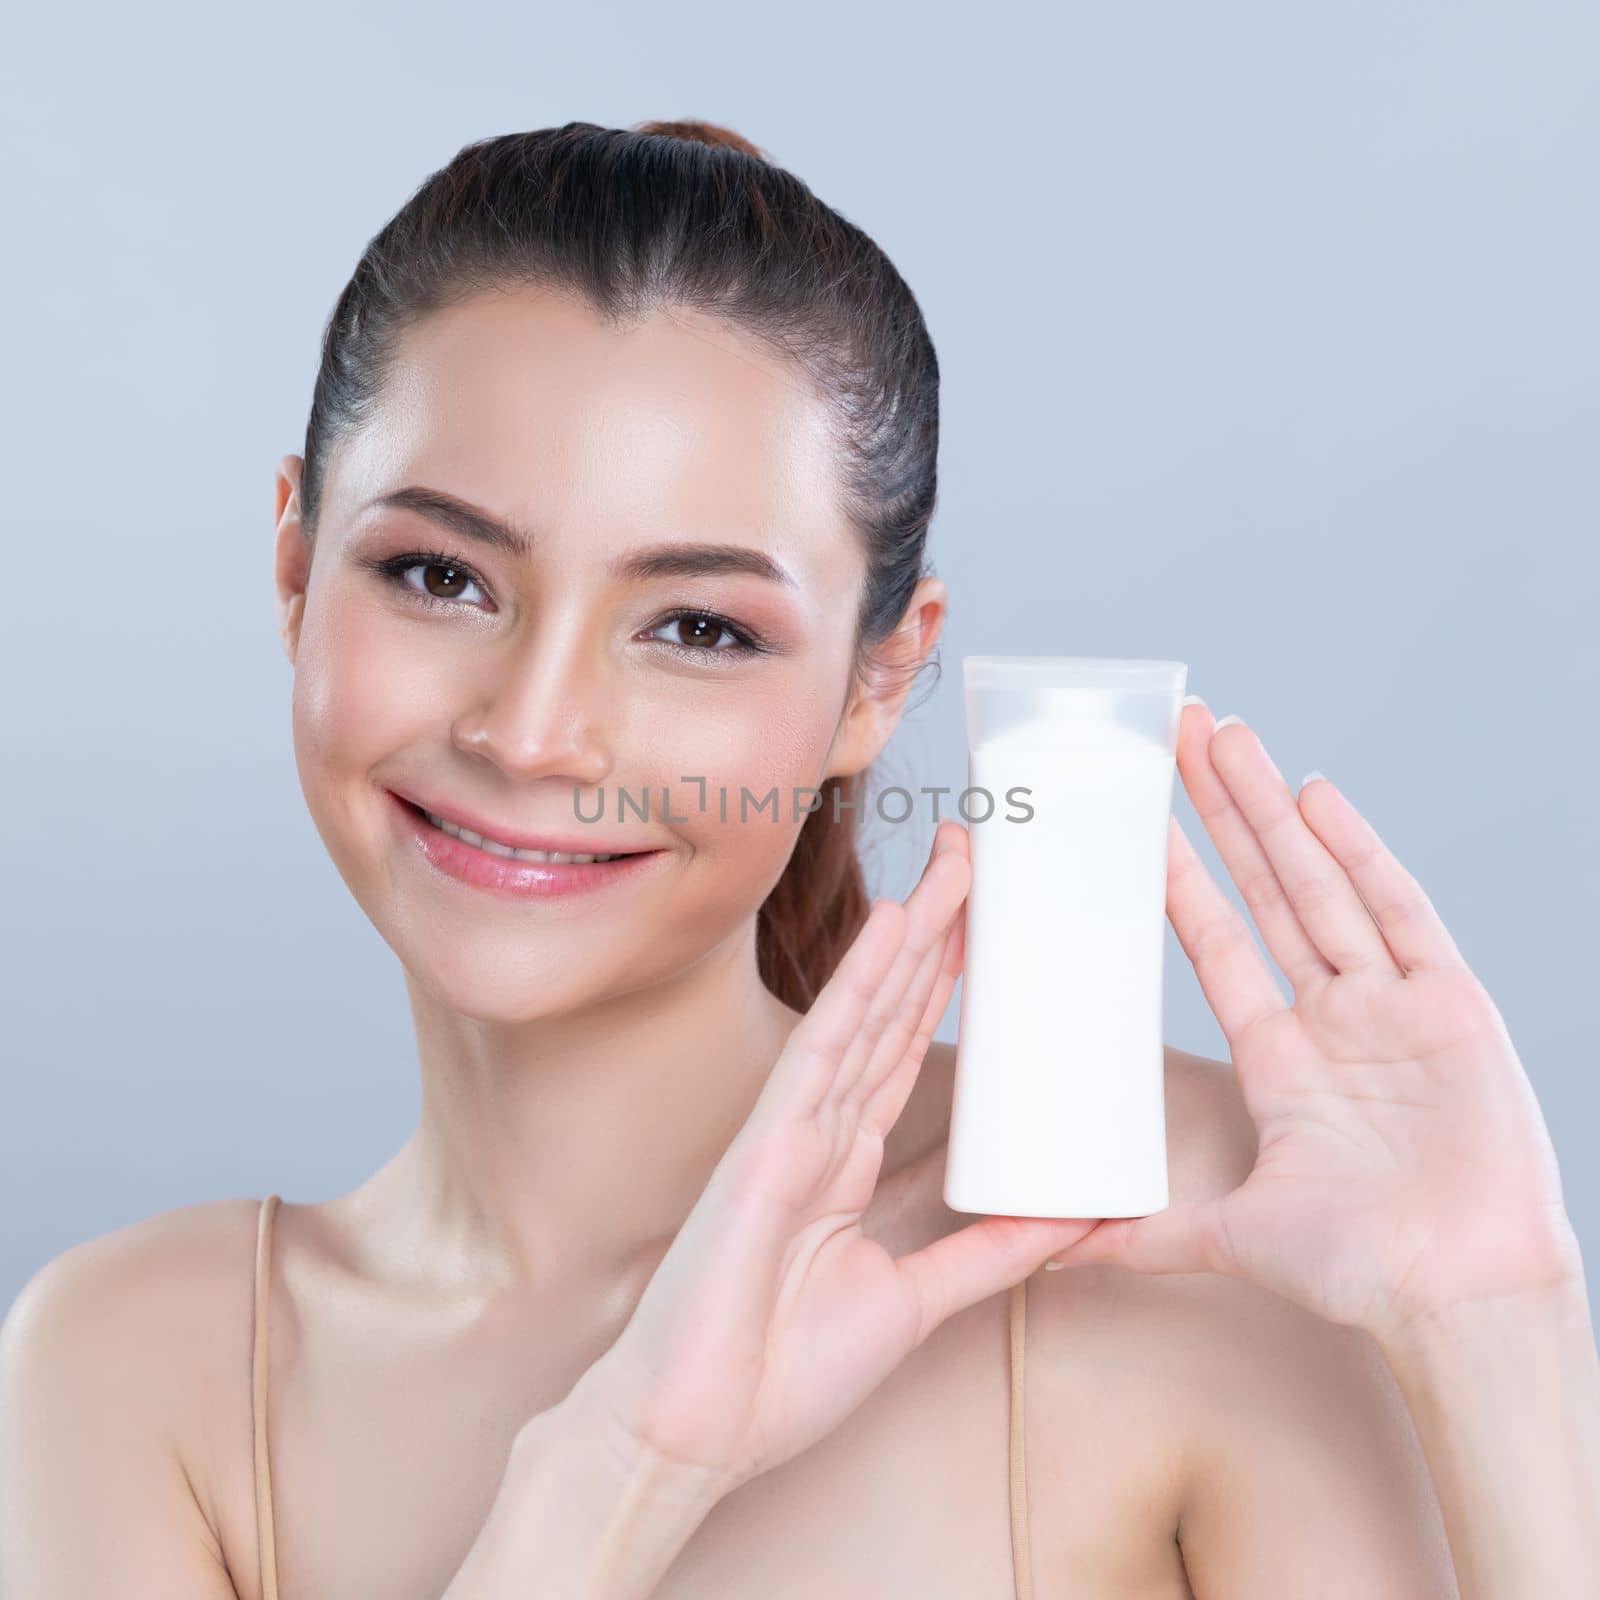 Glamorous beautiful perfect natural cosmetic skin woman portrait hold mockup tub moisturizer cream for skincare treatment, anti-aging product advertisement in isolated background.